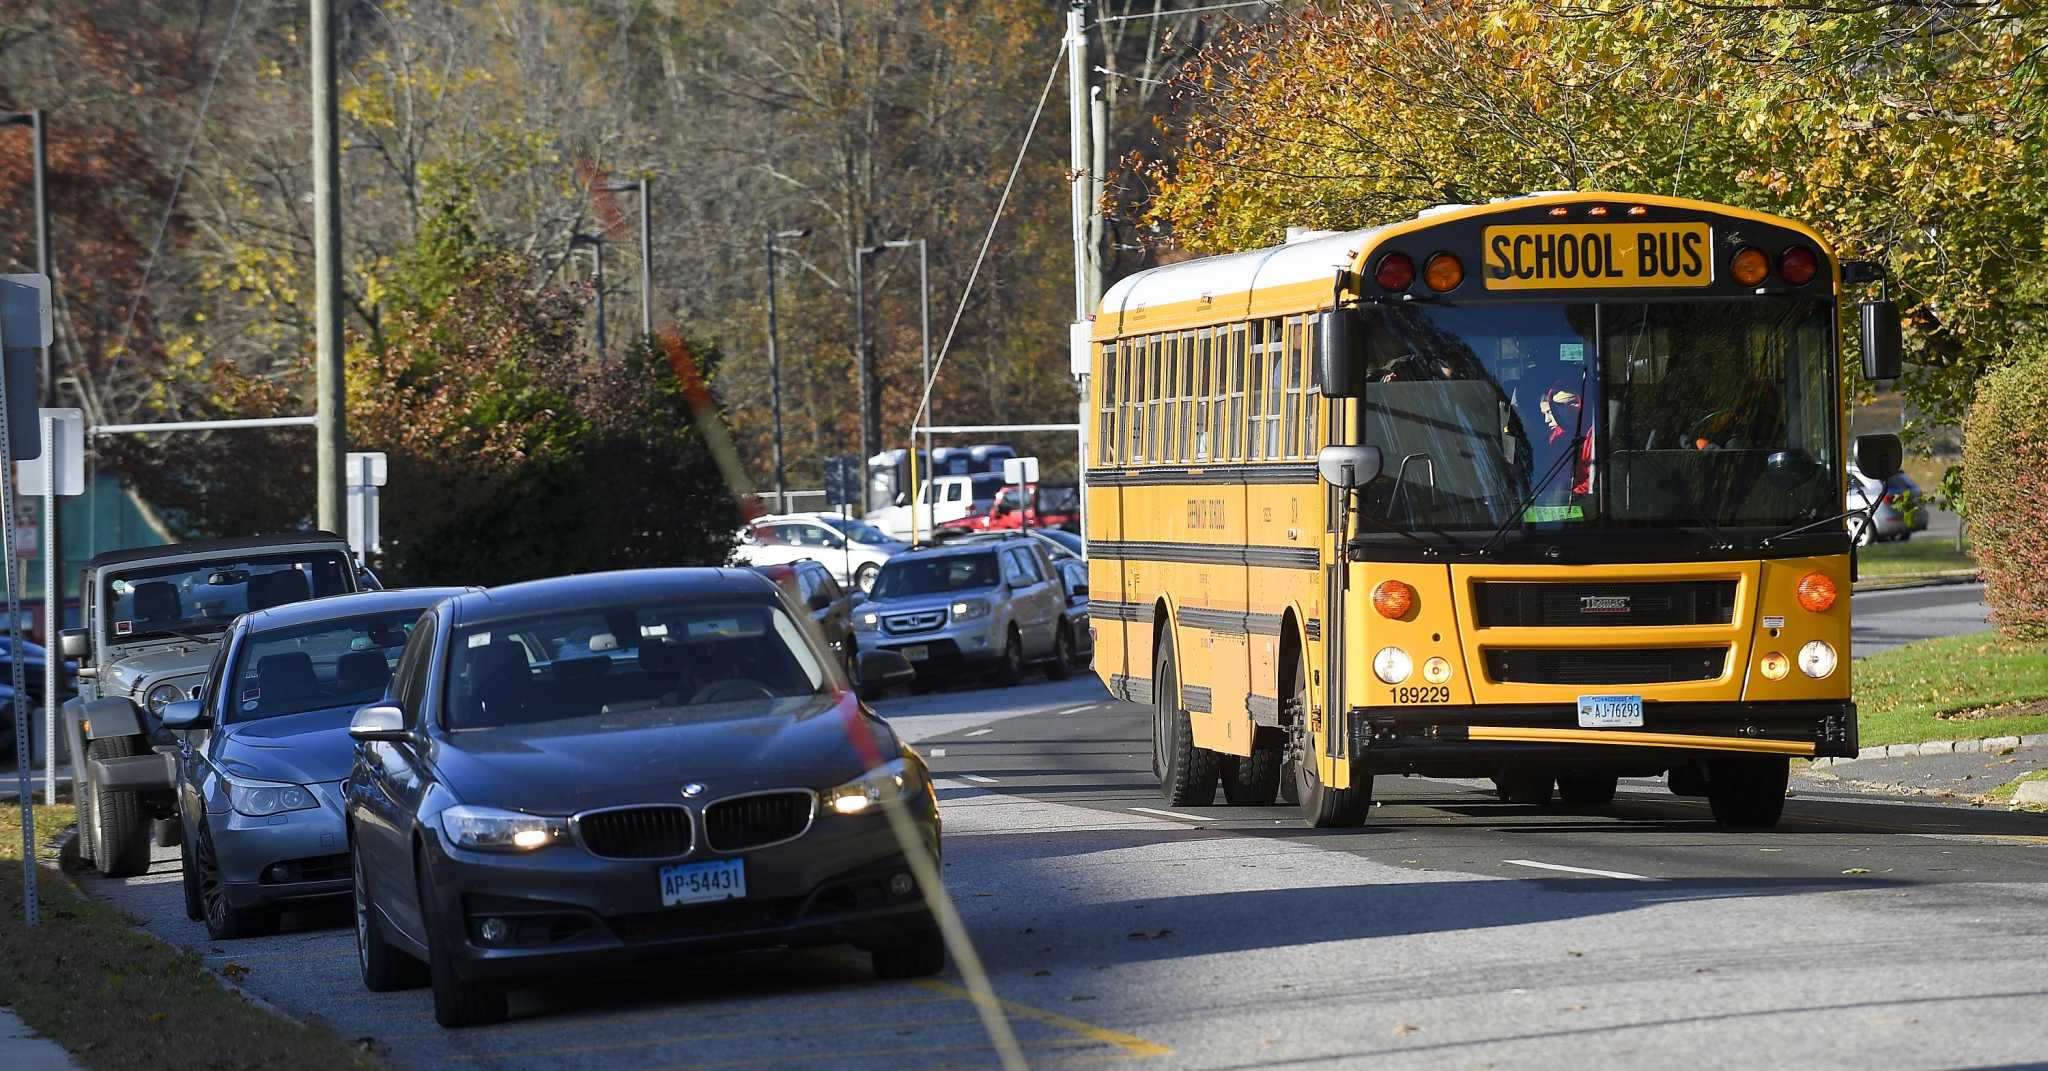 After spring break, CT schools should prepare for COVID surge, state warns